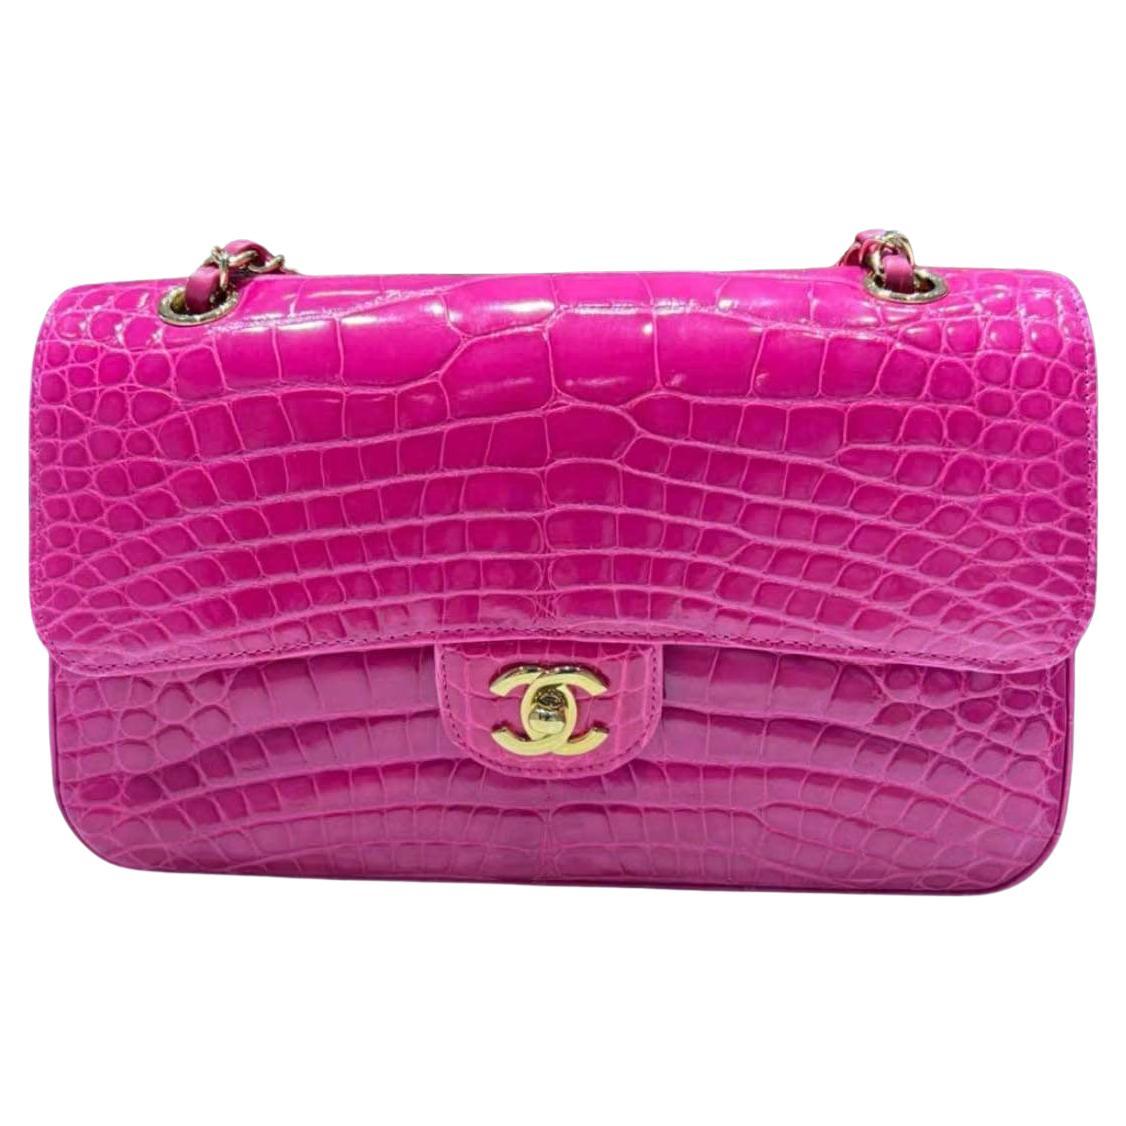 Chanel Hot Pink Shiny Alligator Jumbo Double Flap Bag with Gold Hardware en vente